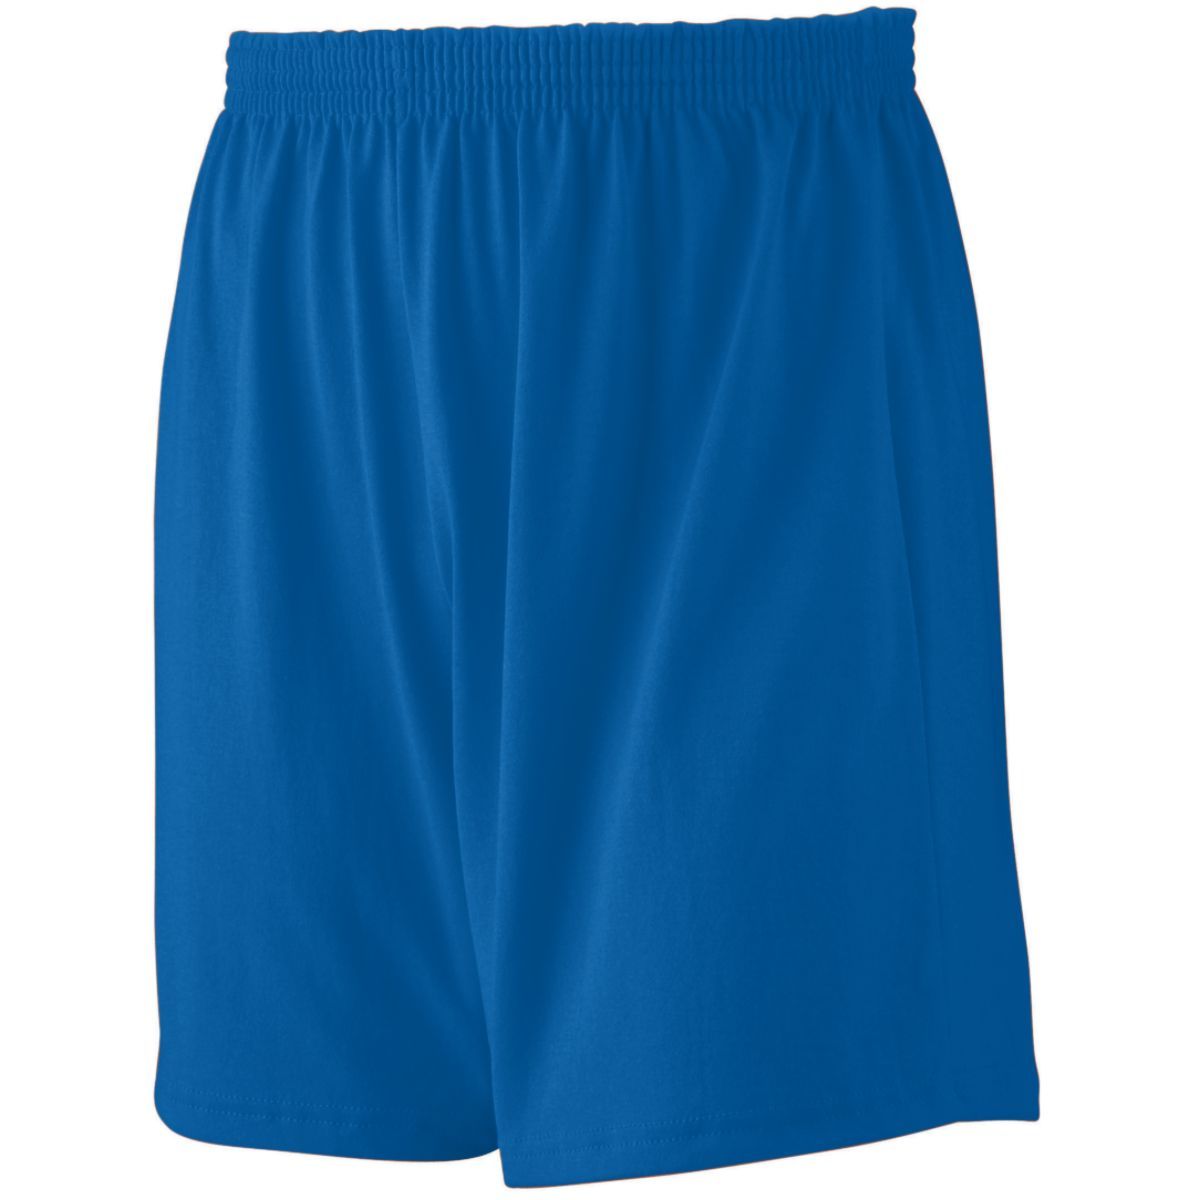 Augusta Sportswear Jersey Knit Shorts in Royal  -Part of the Adult, Adult-Shorts, Augusta-Products product lines at KanaleyCreations.com